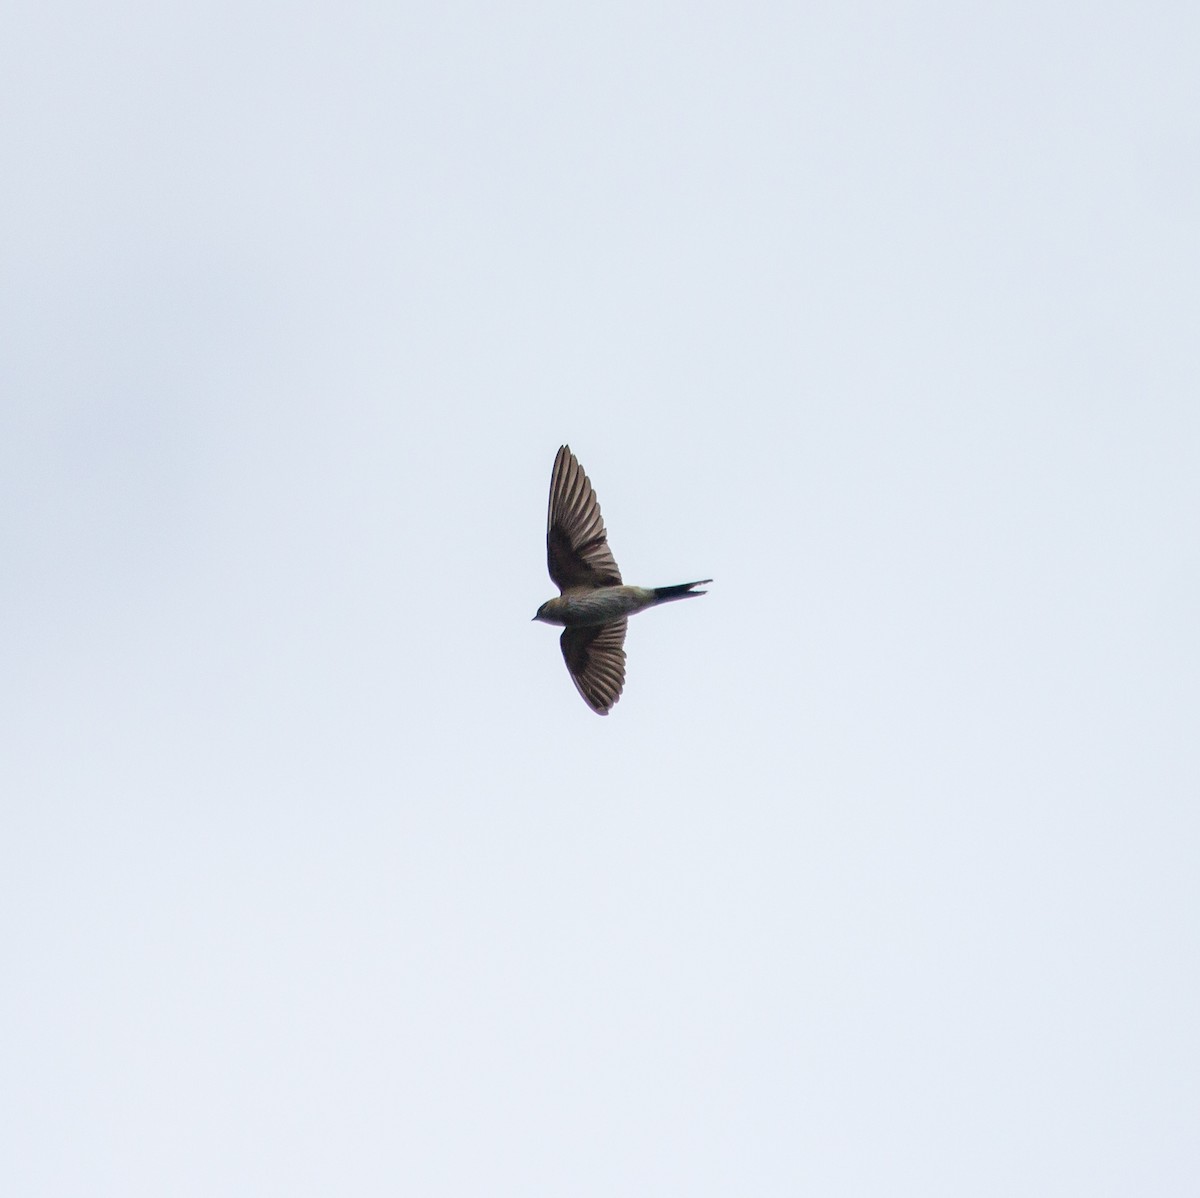 Red-rumped/Striated Swallow - Rail Whisperer